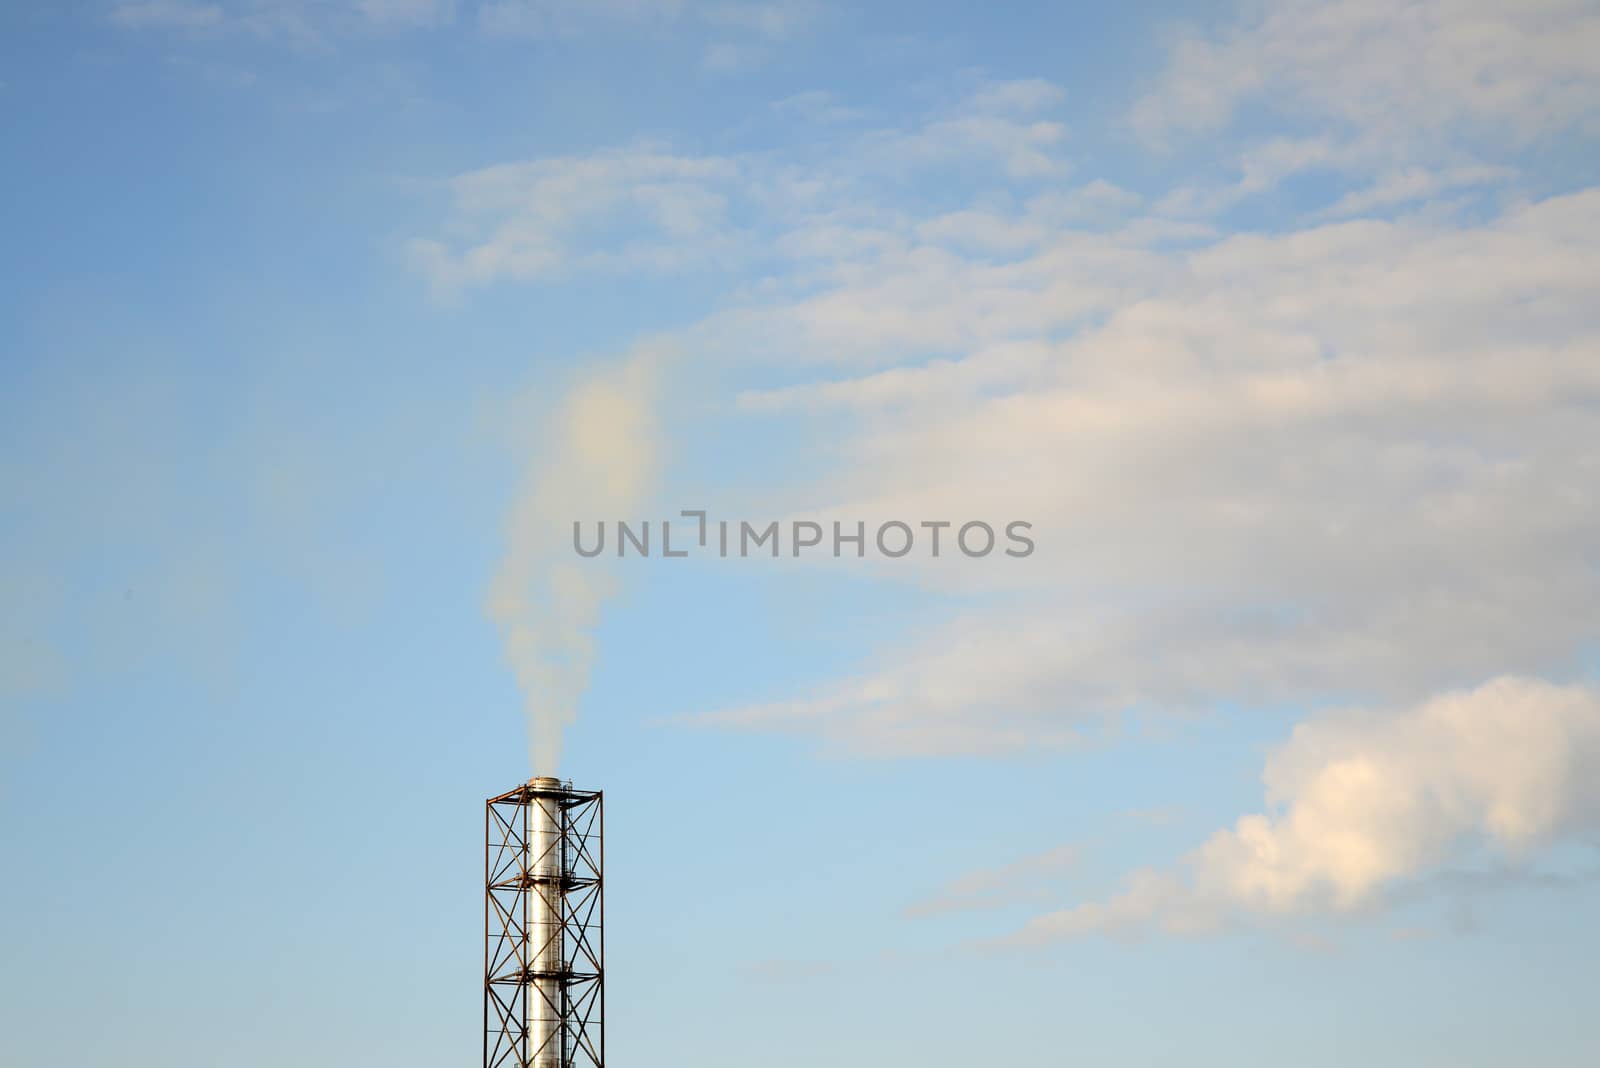 Photo of industrial smoke from a chimney on a blue sky. Illustration of industrial pollution, environmental problems.
Taken in Riga, Latvia.